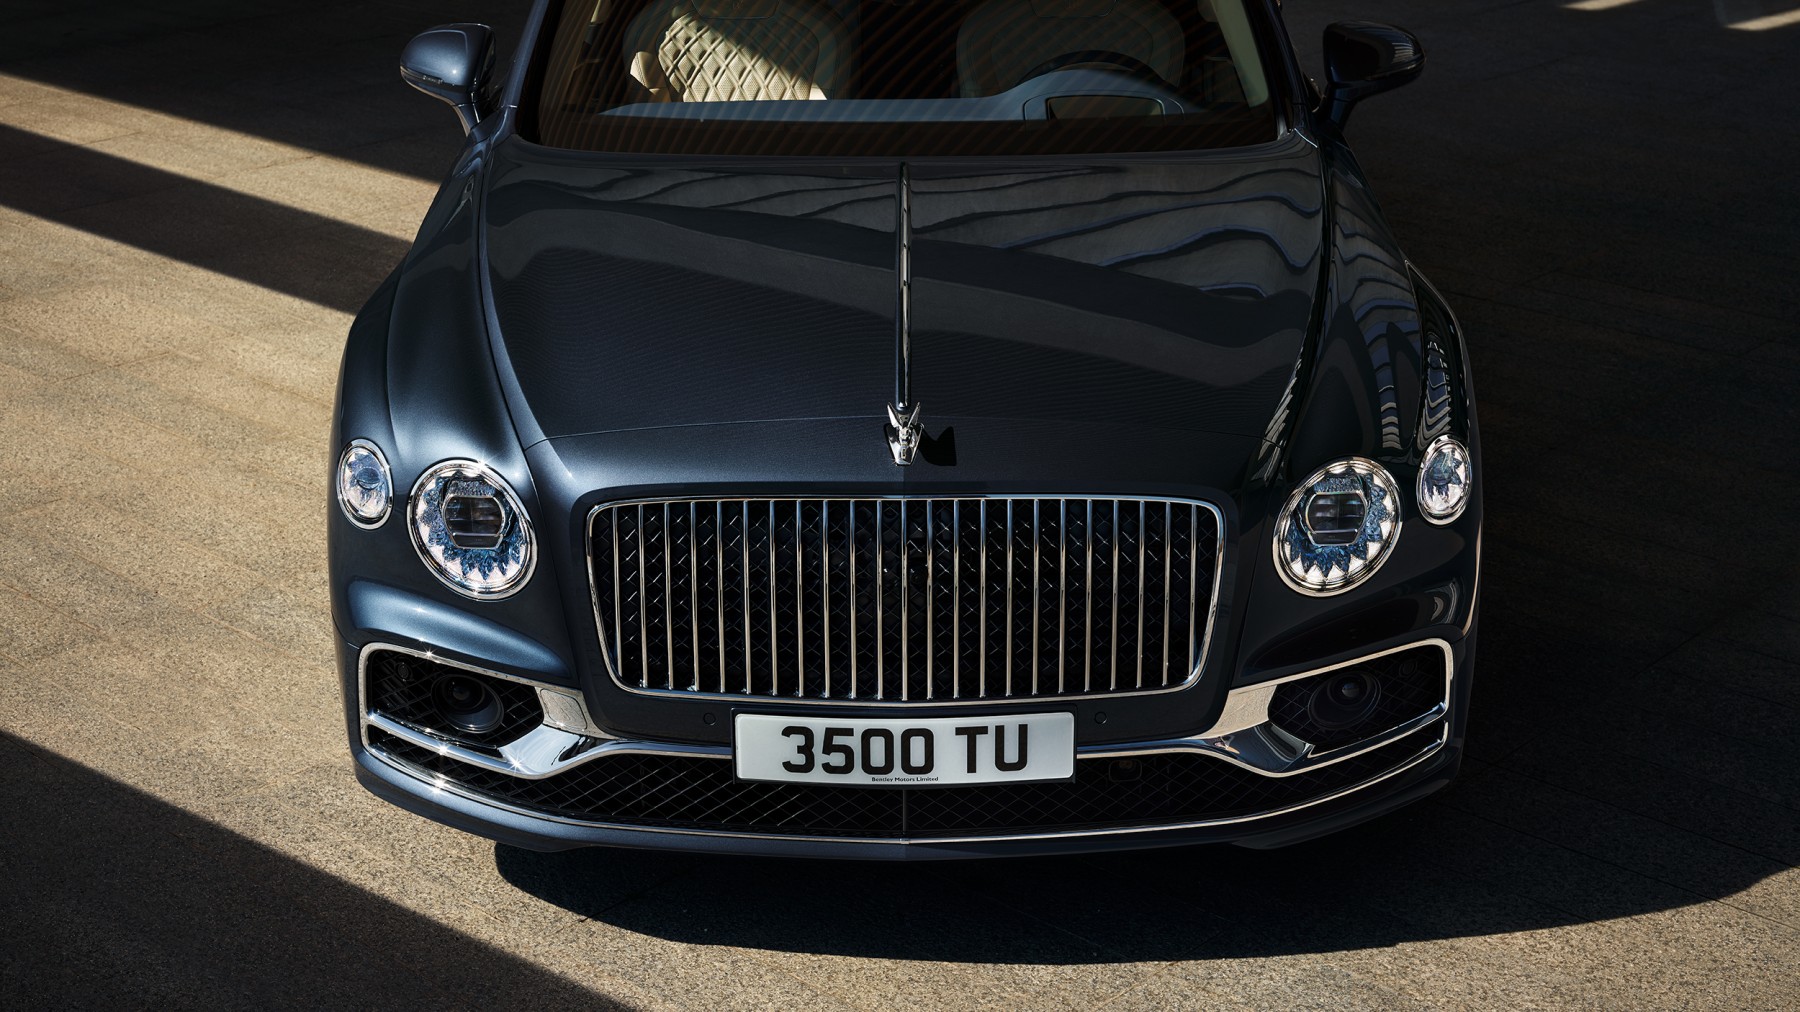 the-new-bentley-flying-spur-1-by-marc-trautmann